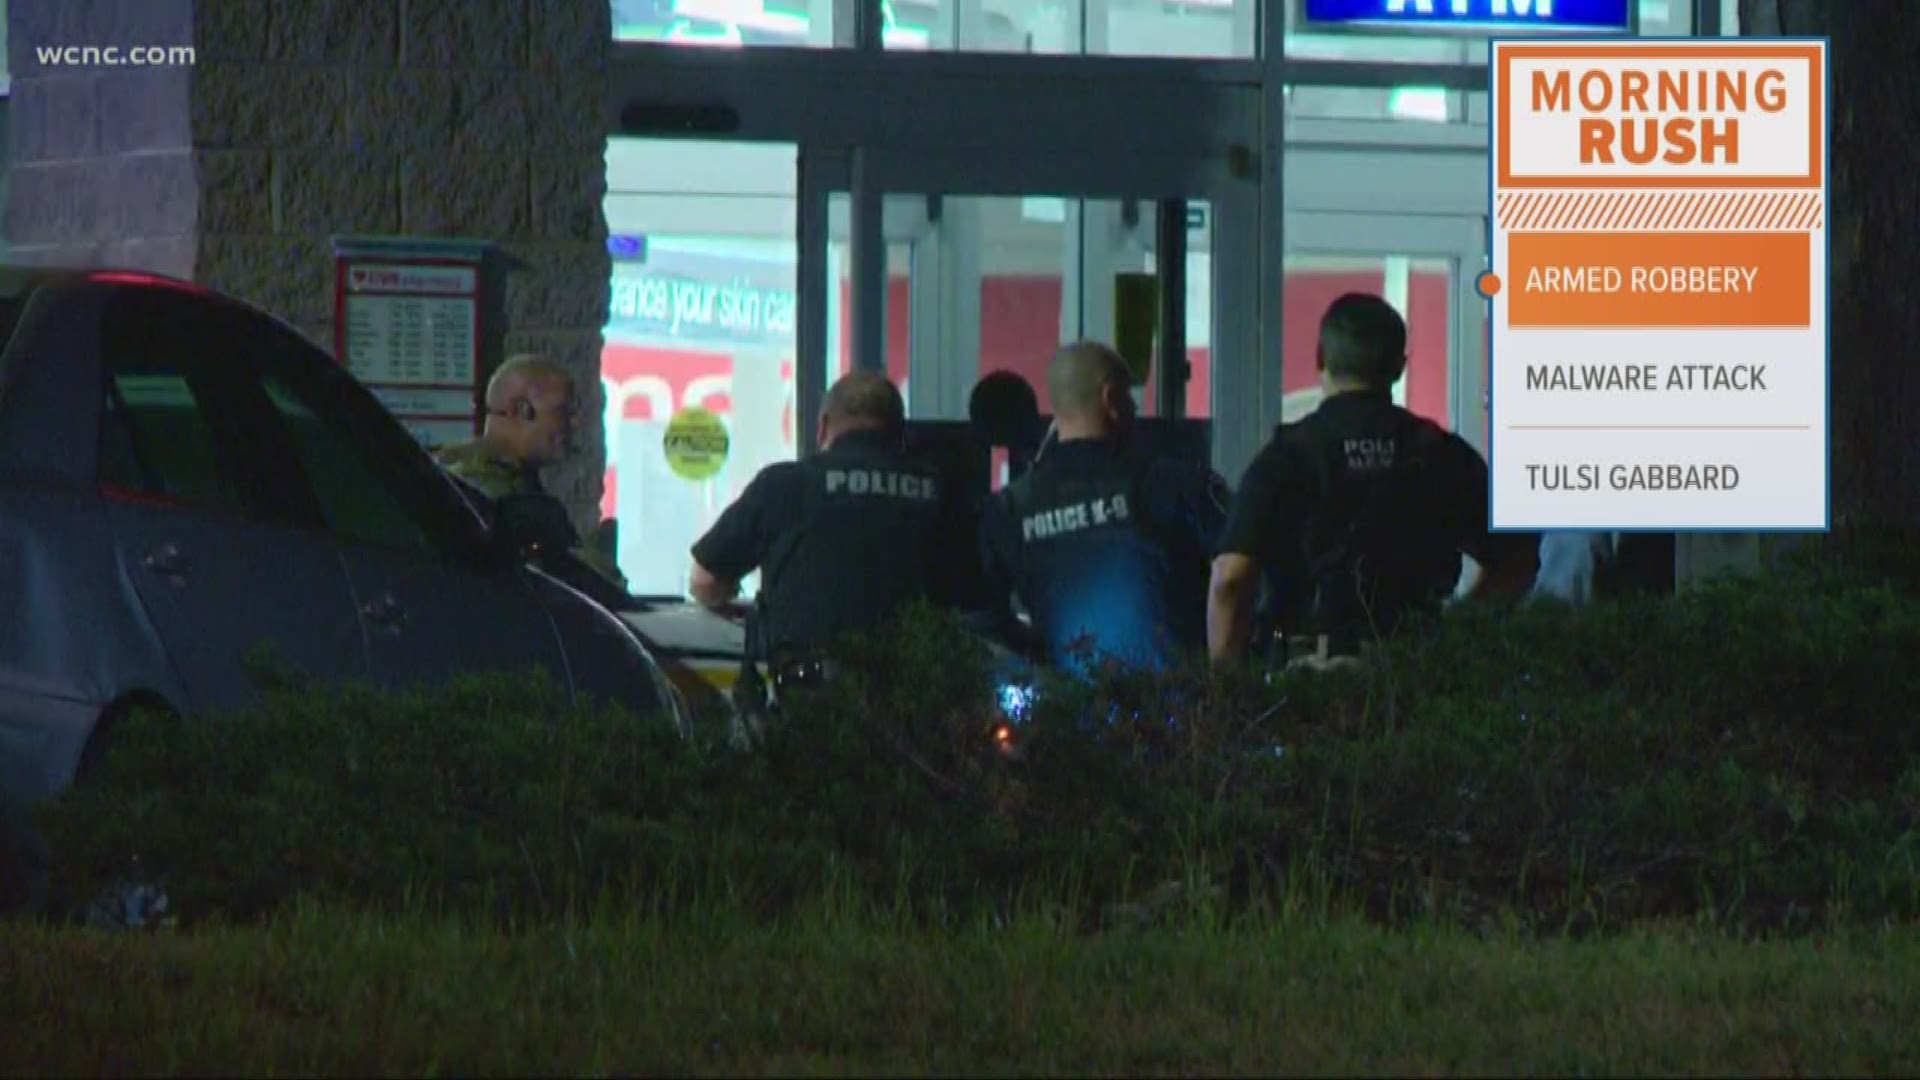 One person was killed in armed robbery at a pharmacy in Matthews Thursday night, police said.